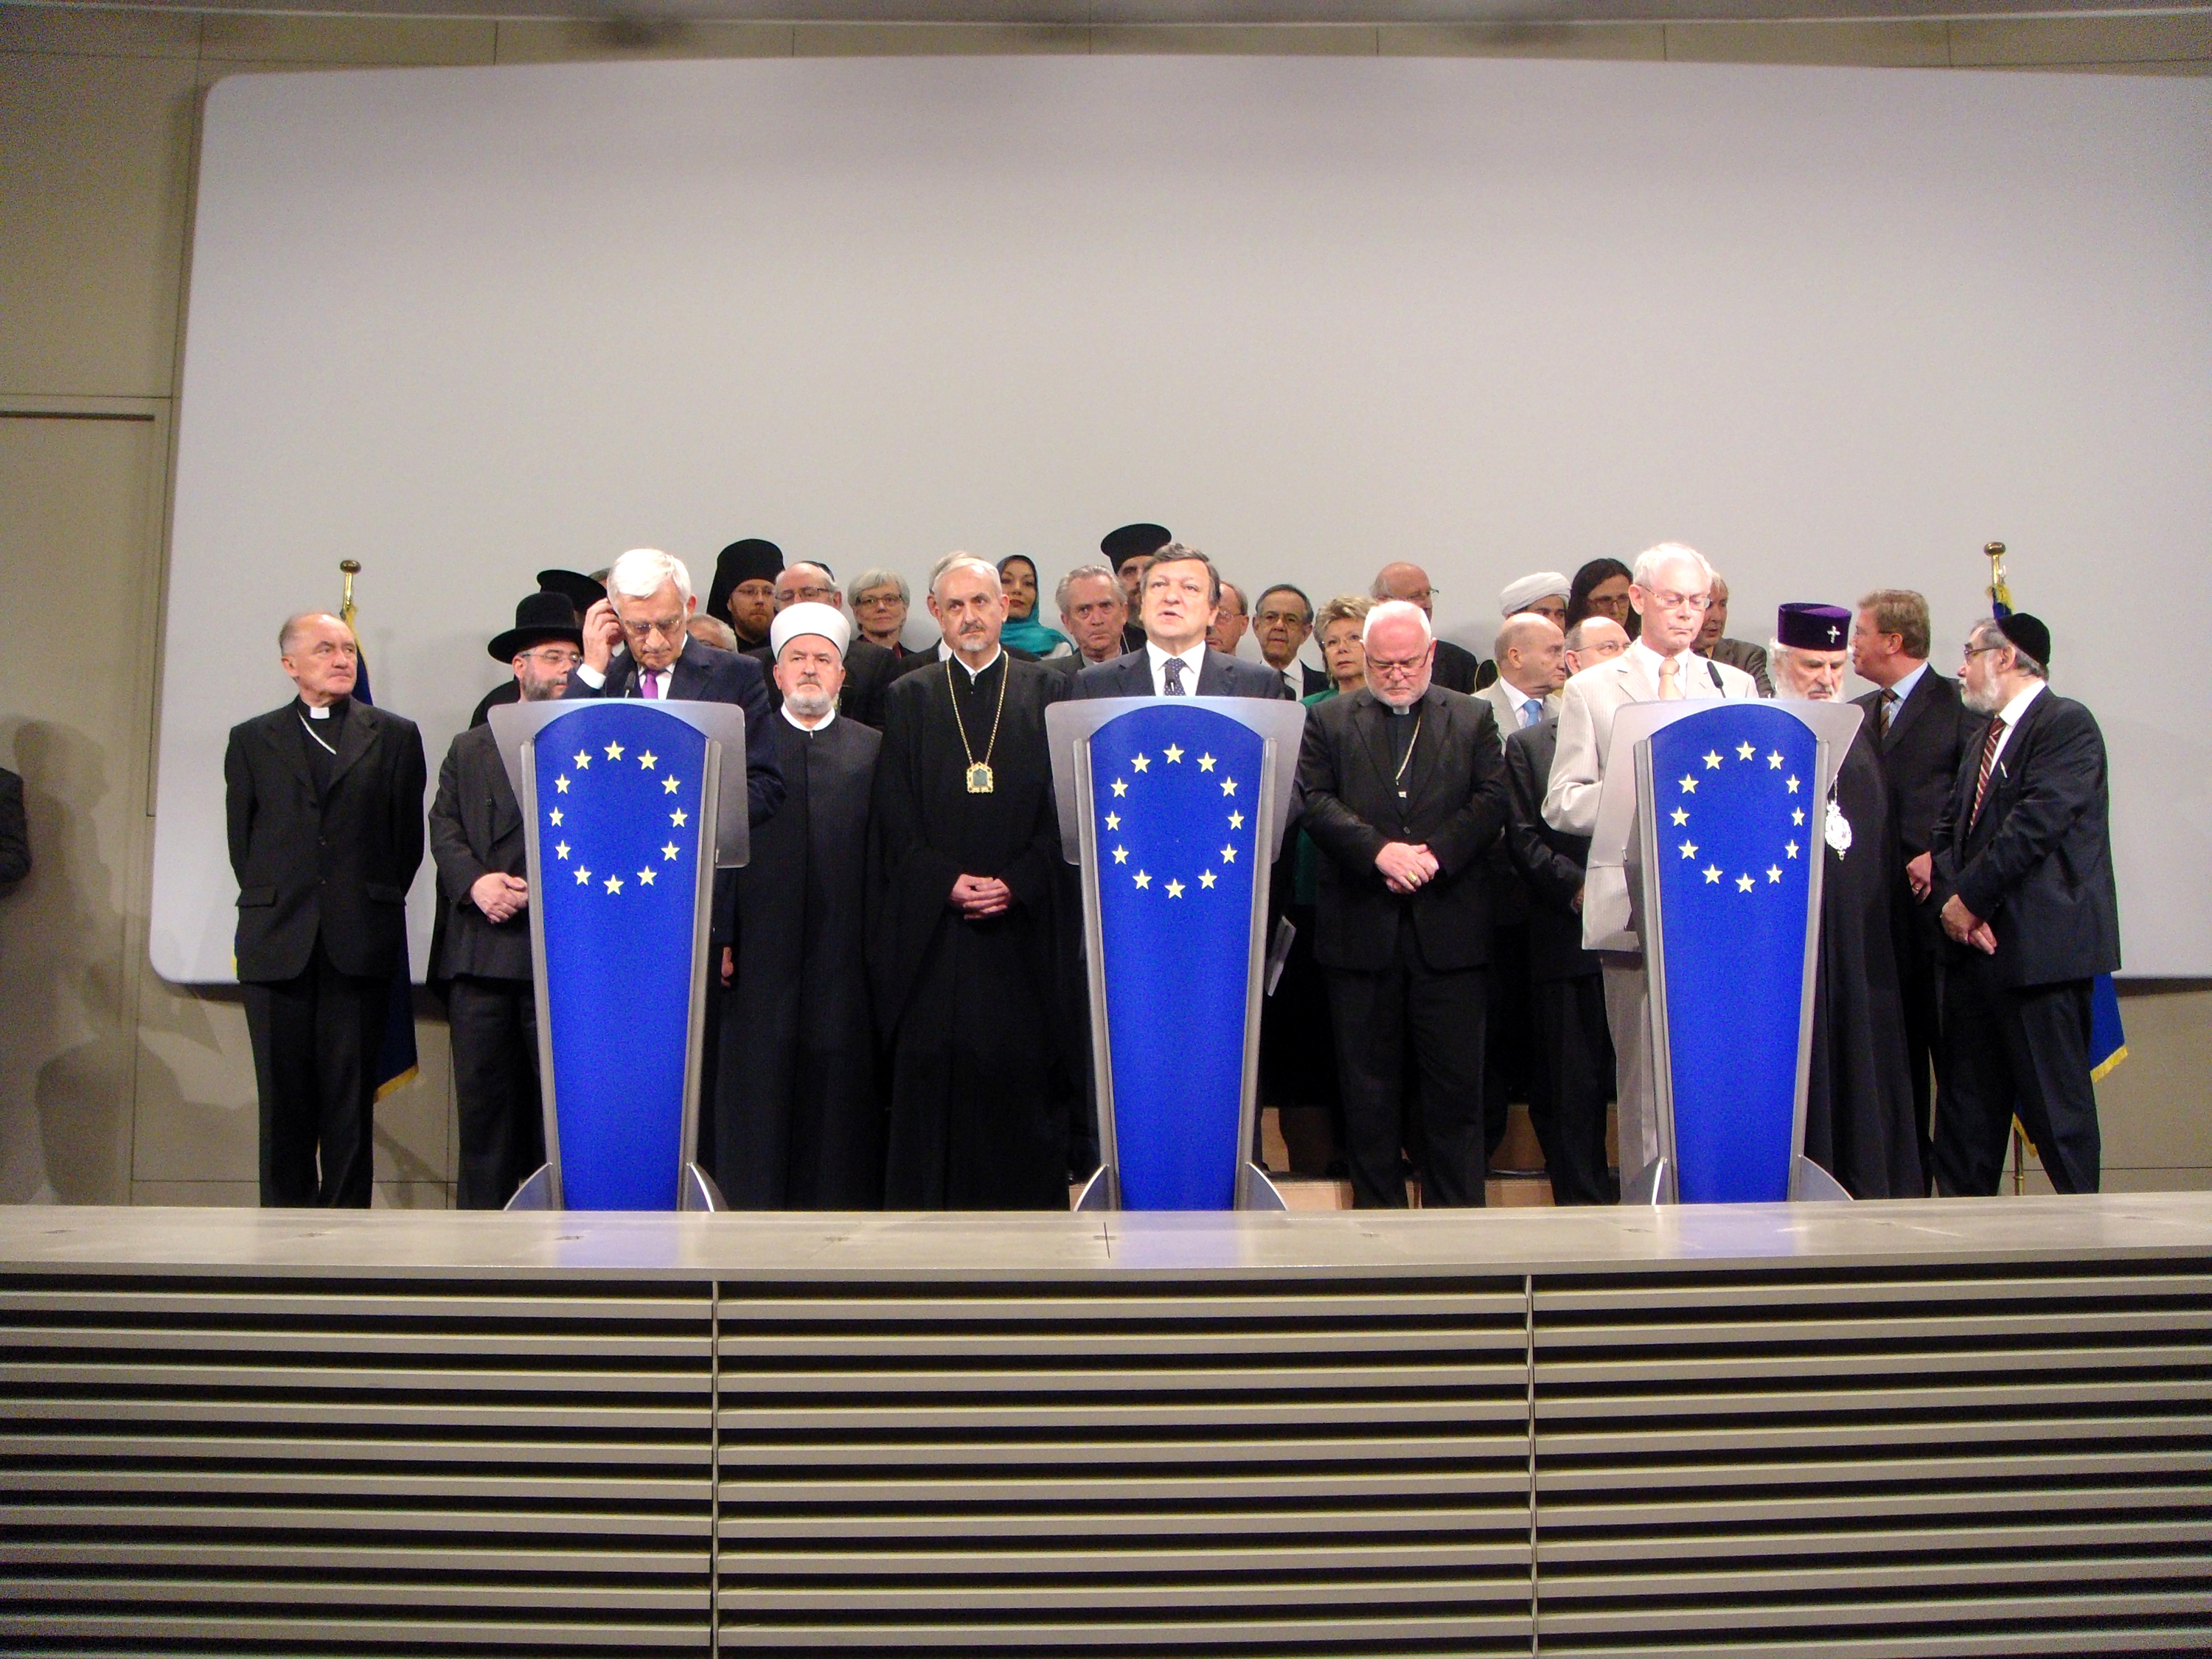 Representatives from the Christian, Jewish, Muslim religions meet in Brussels